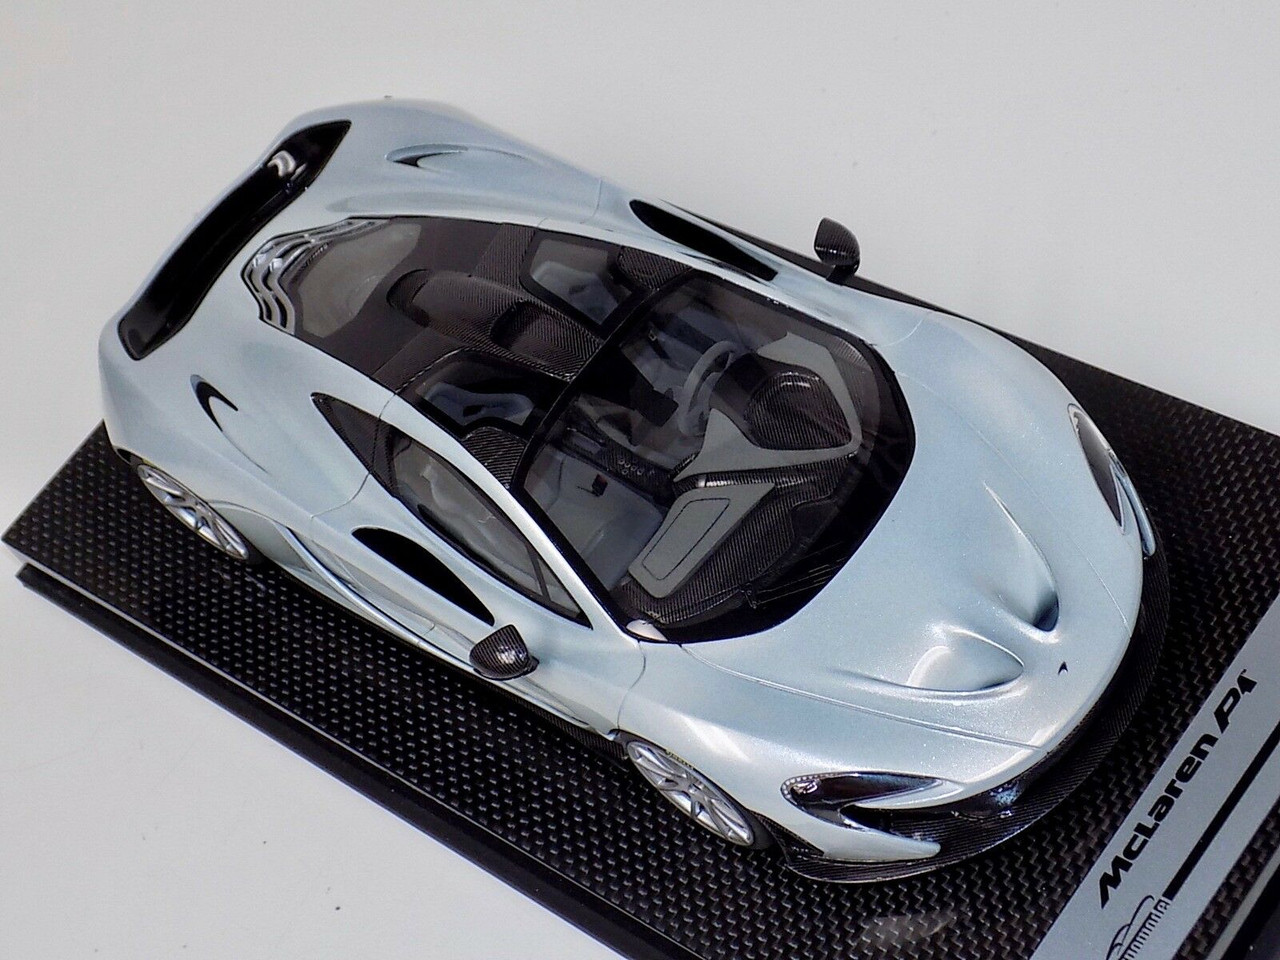 1/18 Tecnomodel McLaren P1 (Ice Silver with Silver wheels & Black Rear Wing) with Carbon Base Resin Car Model Limited 01/07